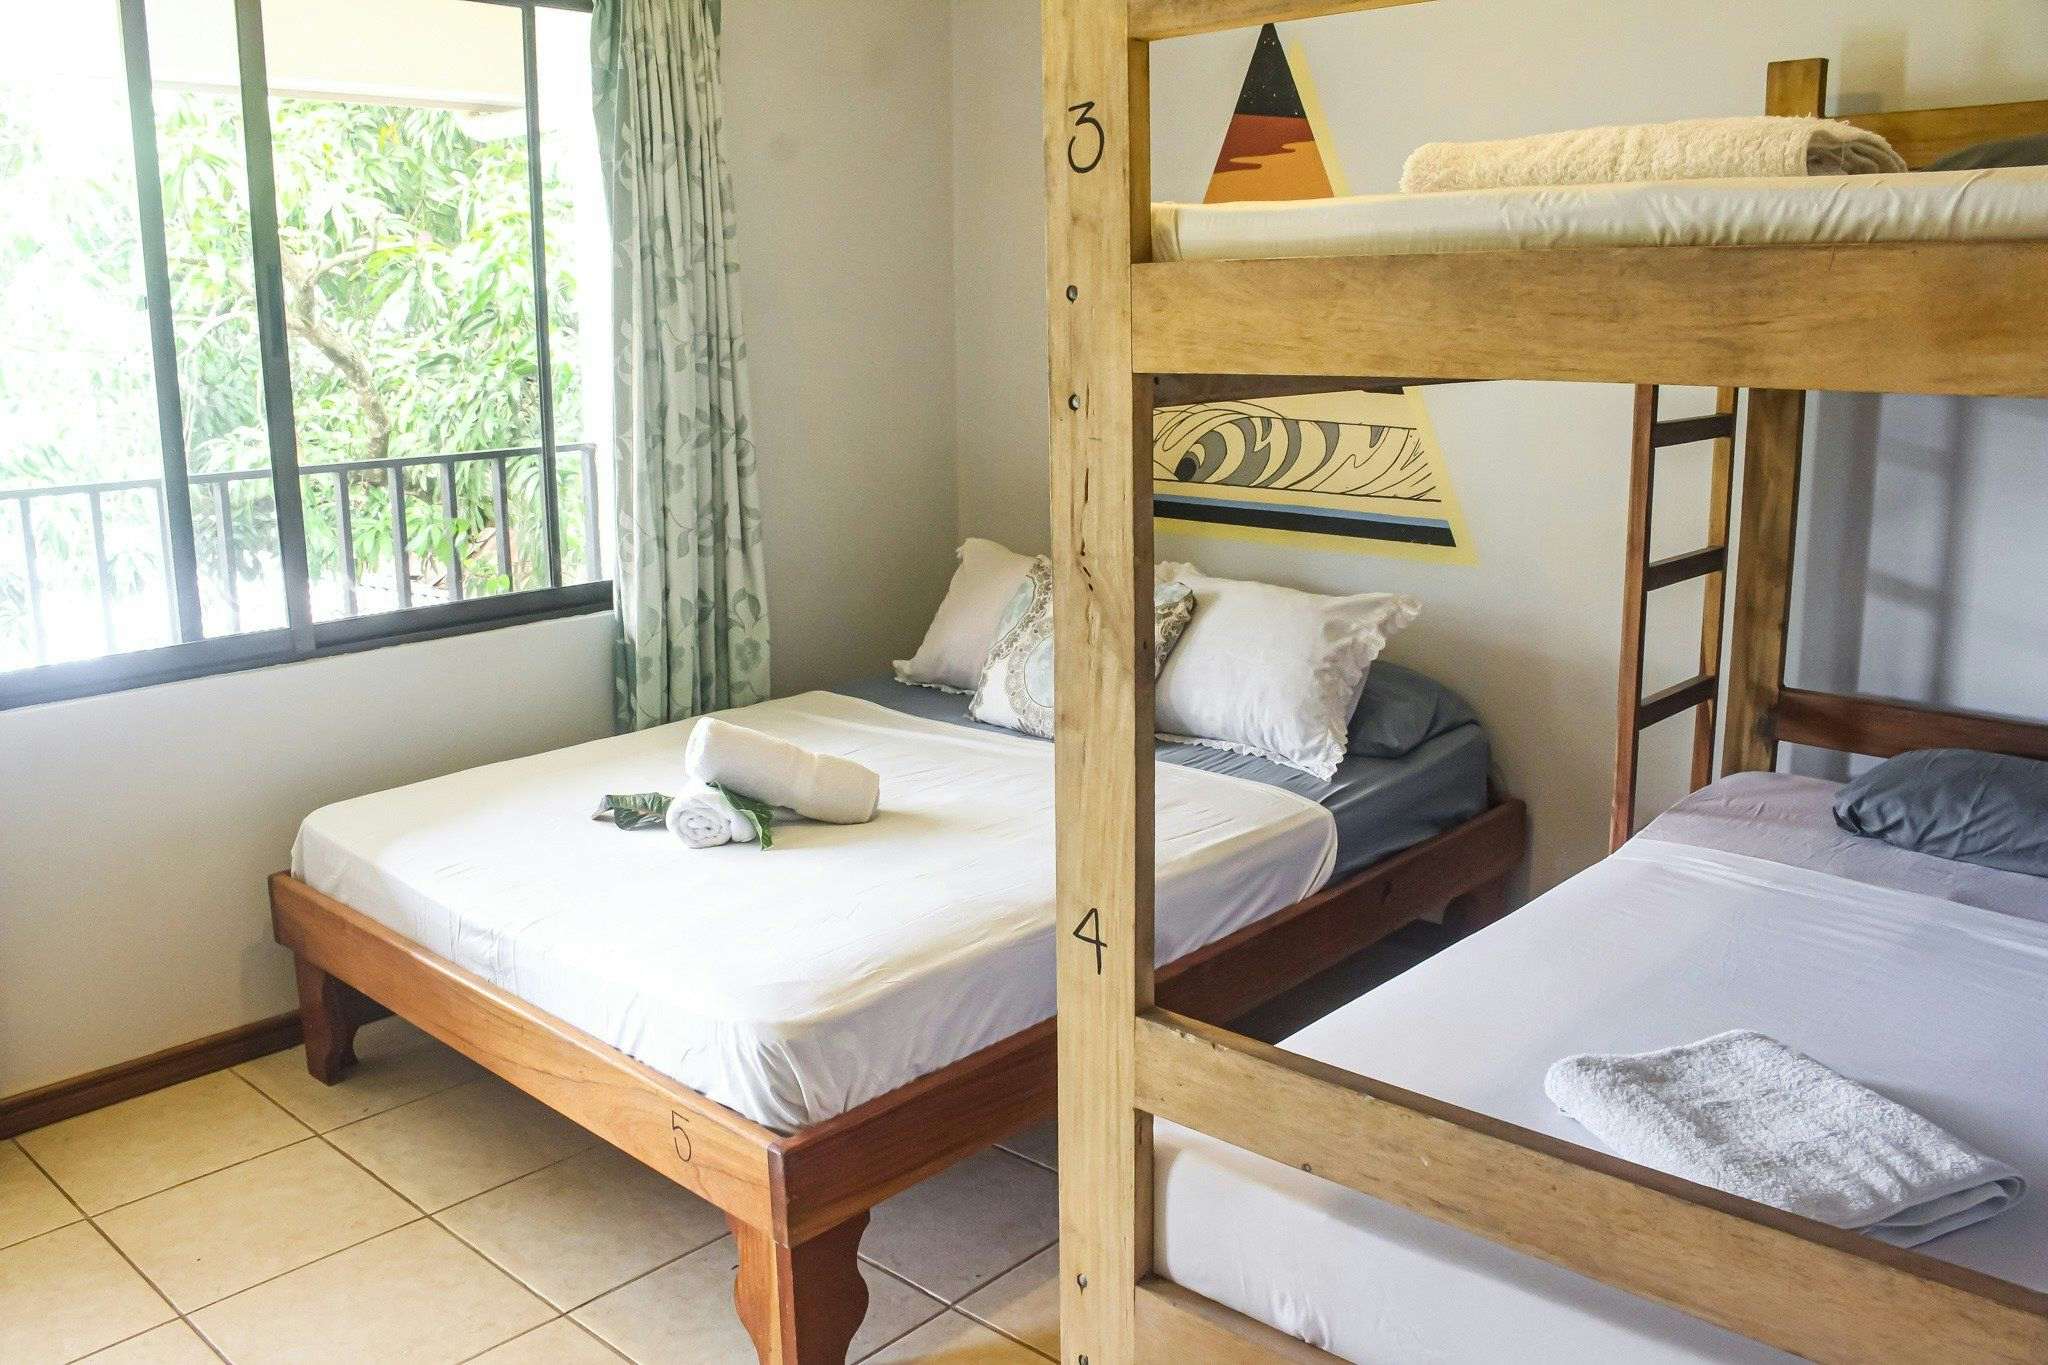 Private quadruple room - 7 days surf vacation